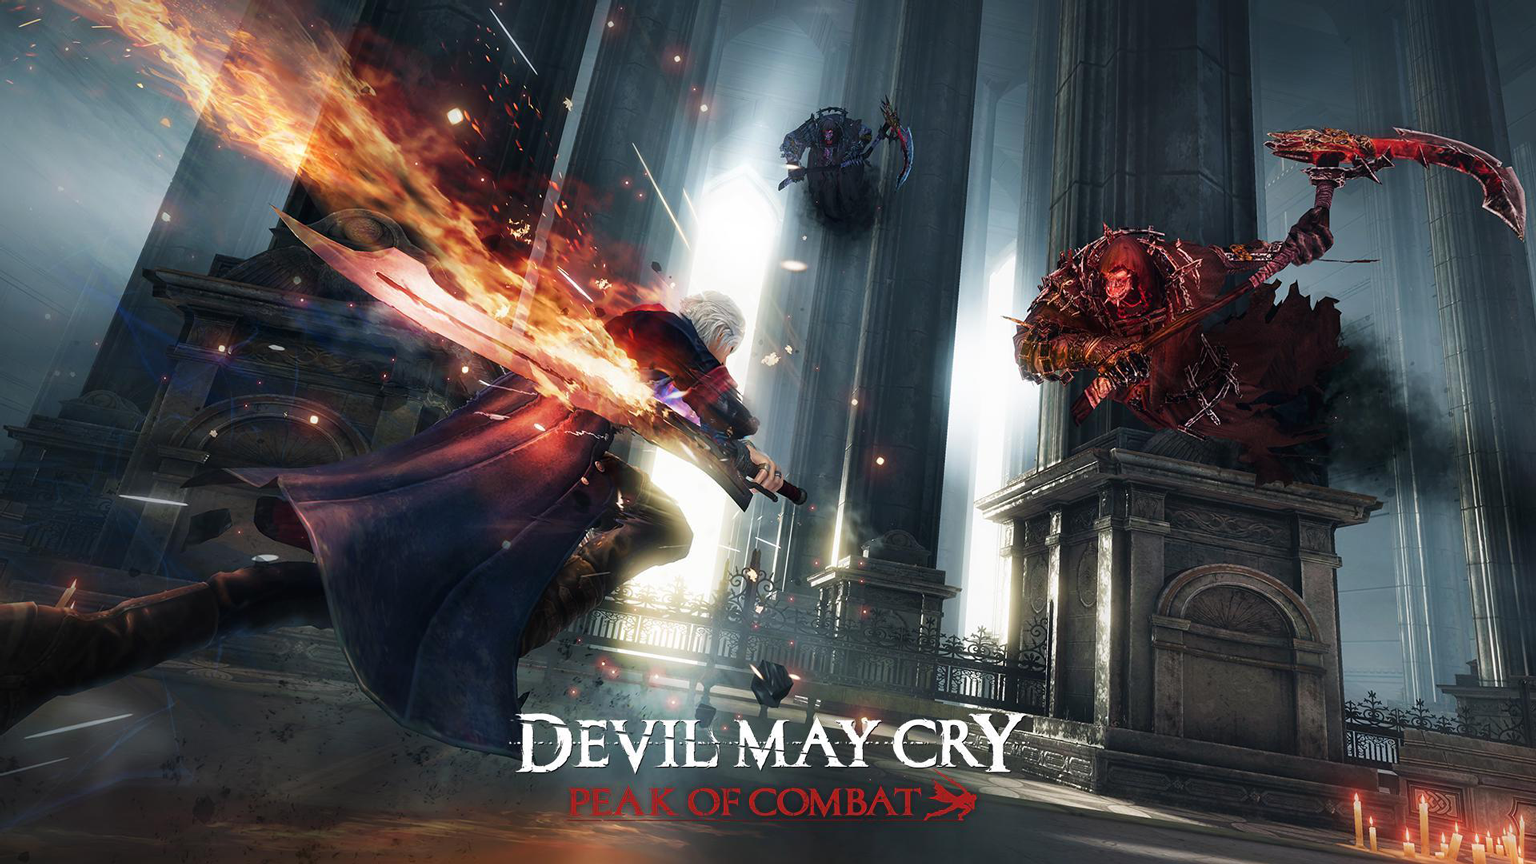 Devil May Cry mobile game releases on iOS and Android